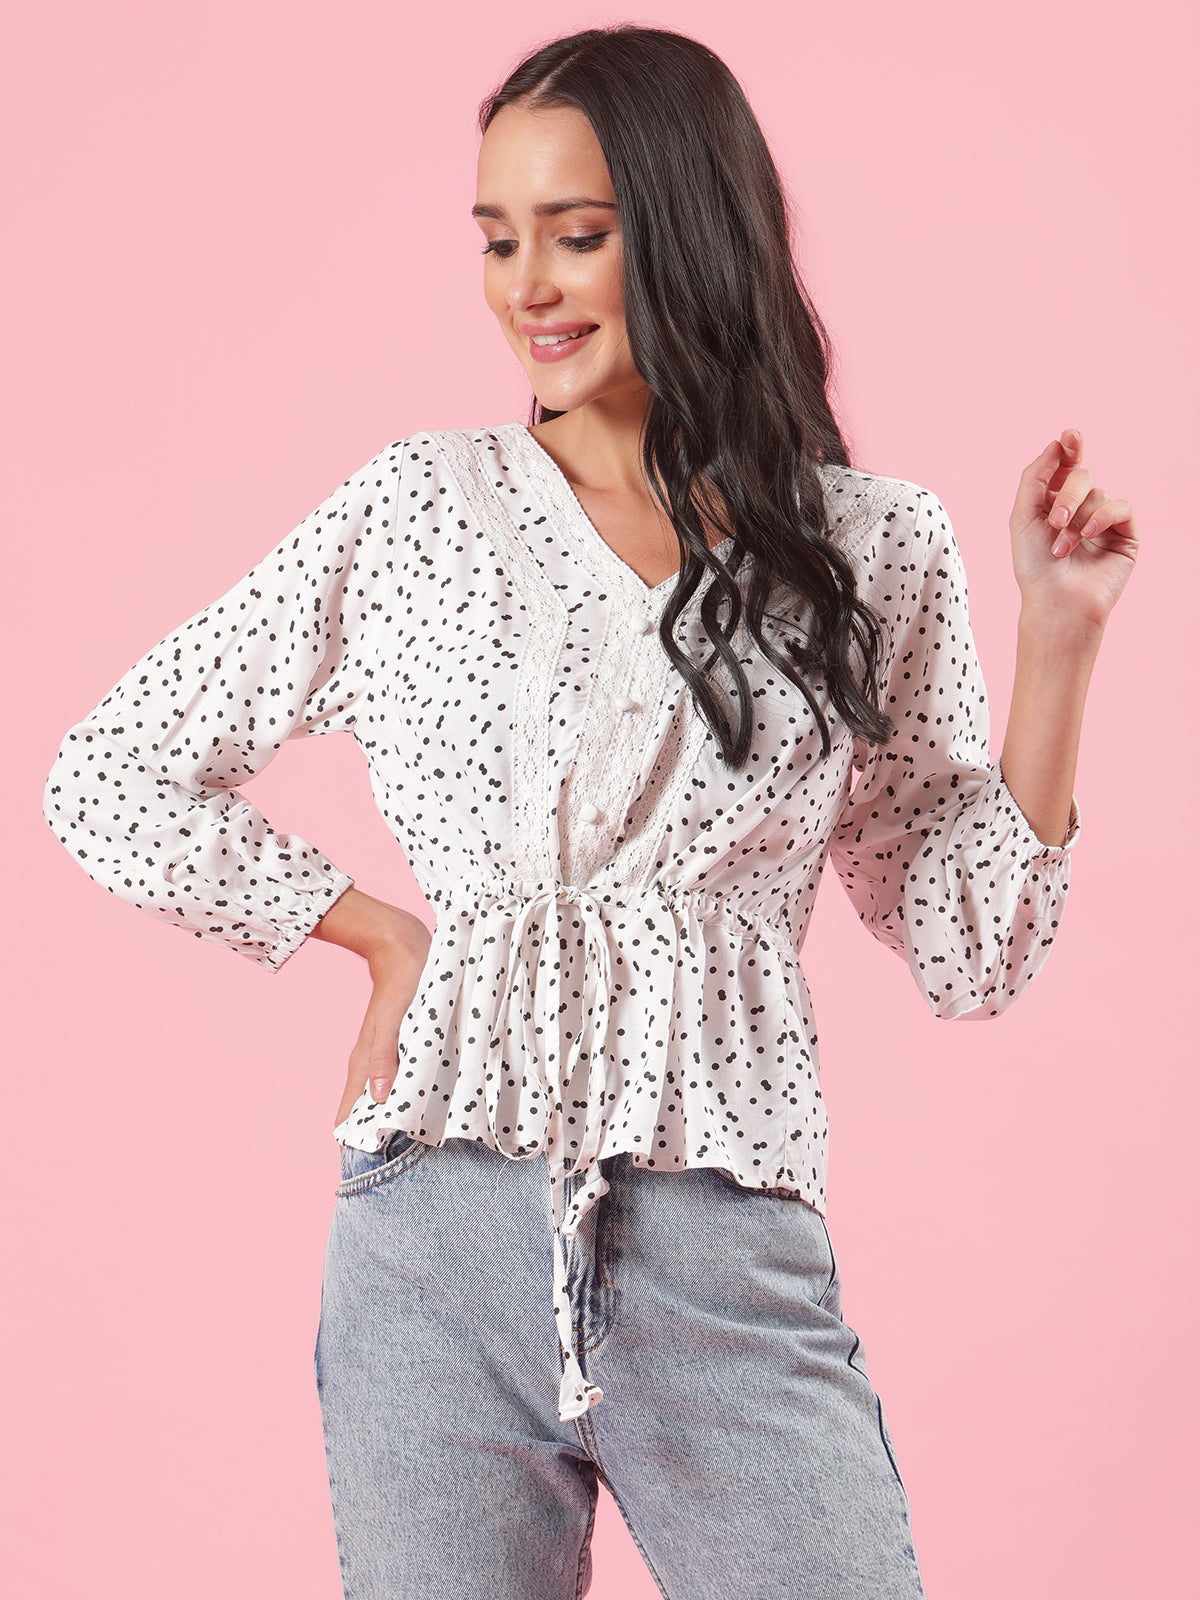 Mono Chrome White and Black Polka Dot Womens Casual Top with Lace and Drawstring Details